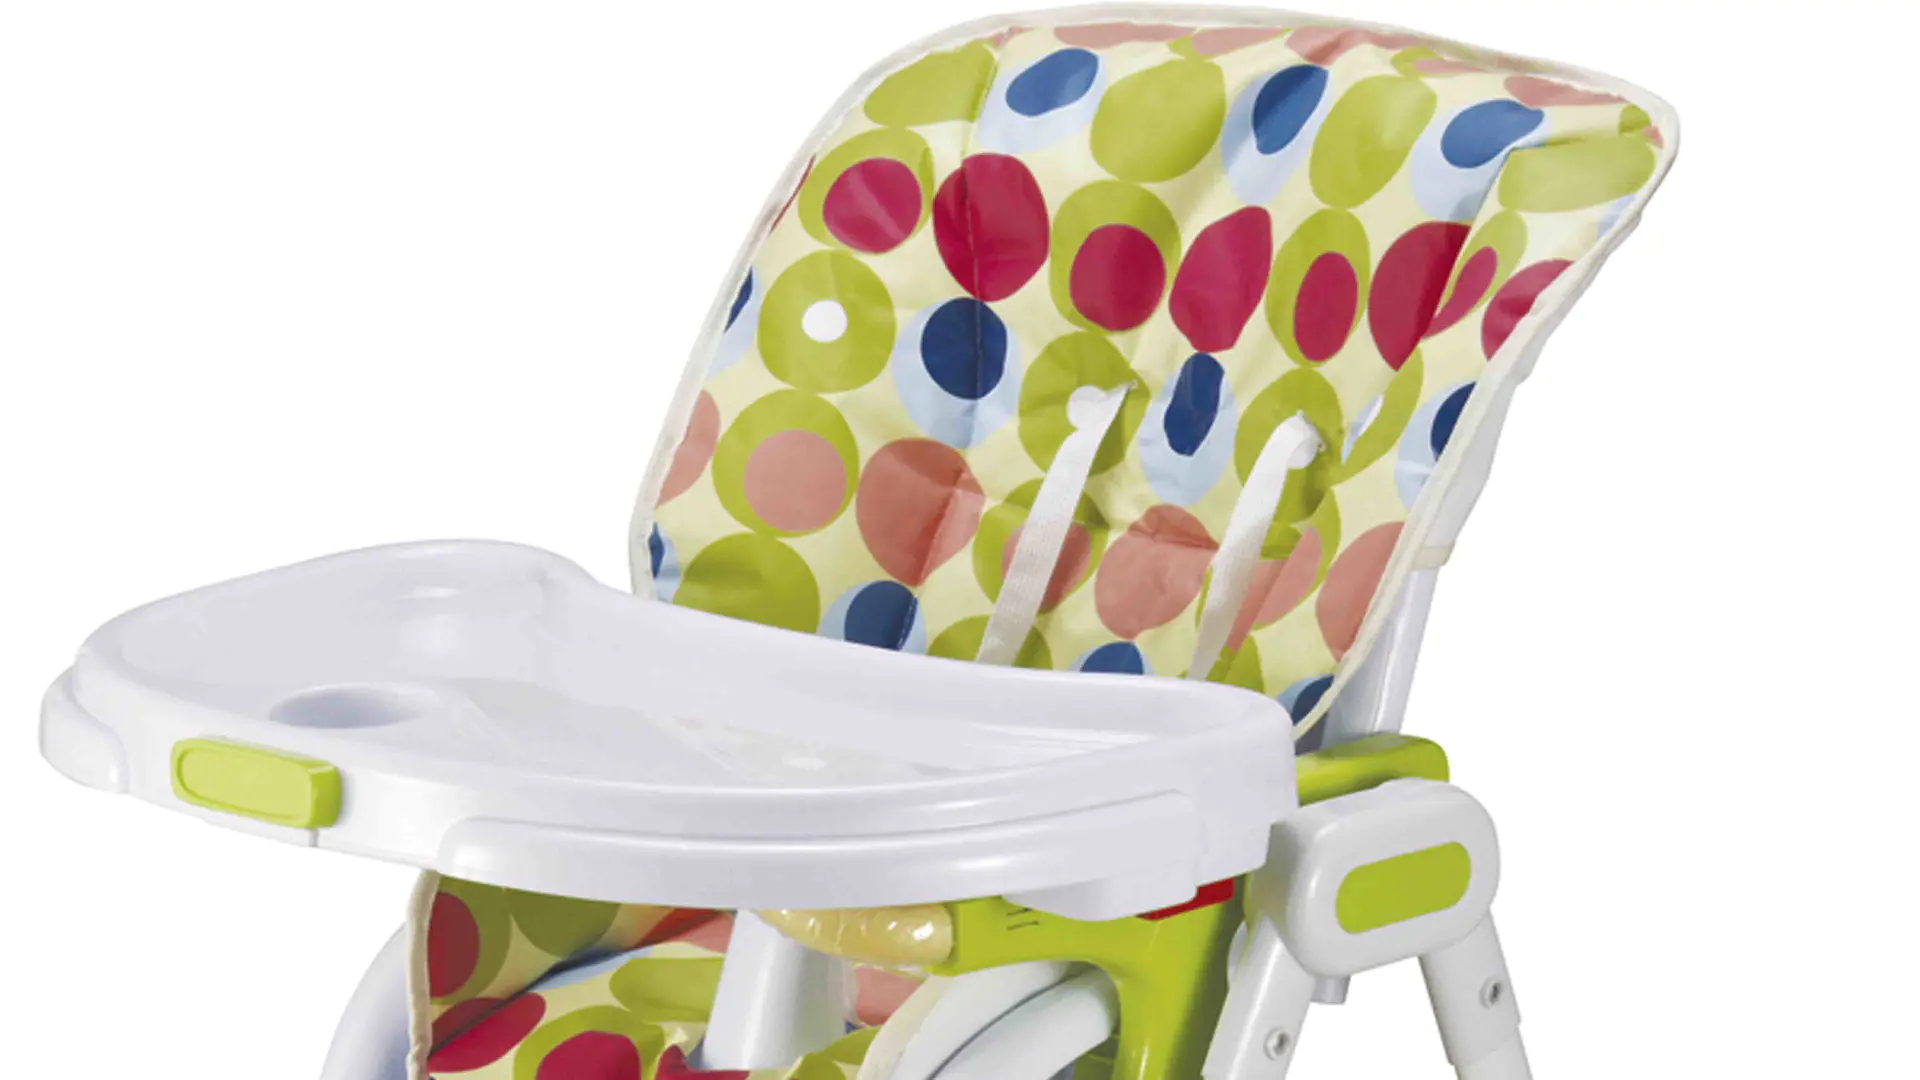 Aoqi foldable baby high chair with wheels customized for infant